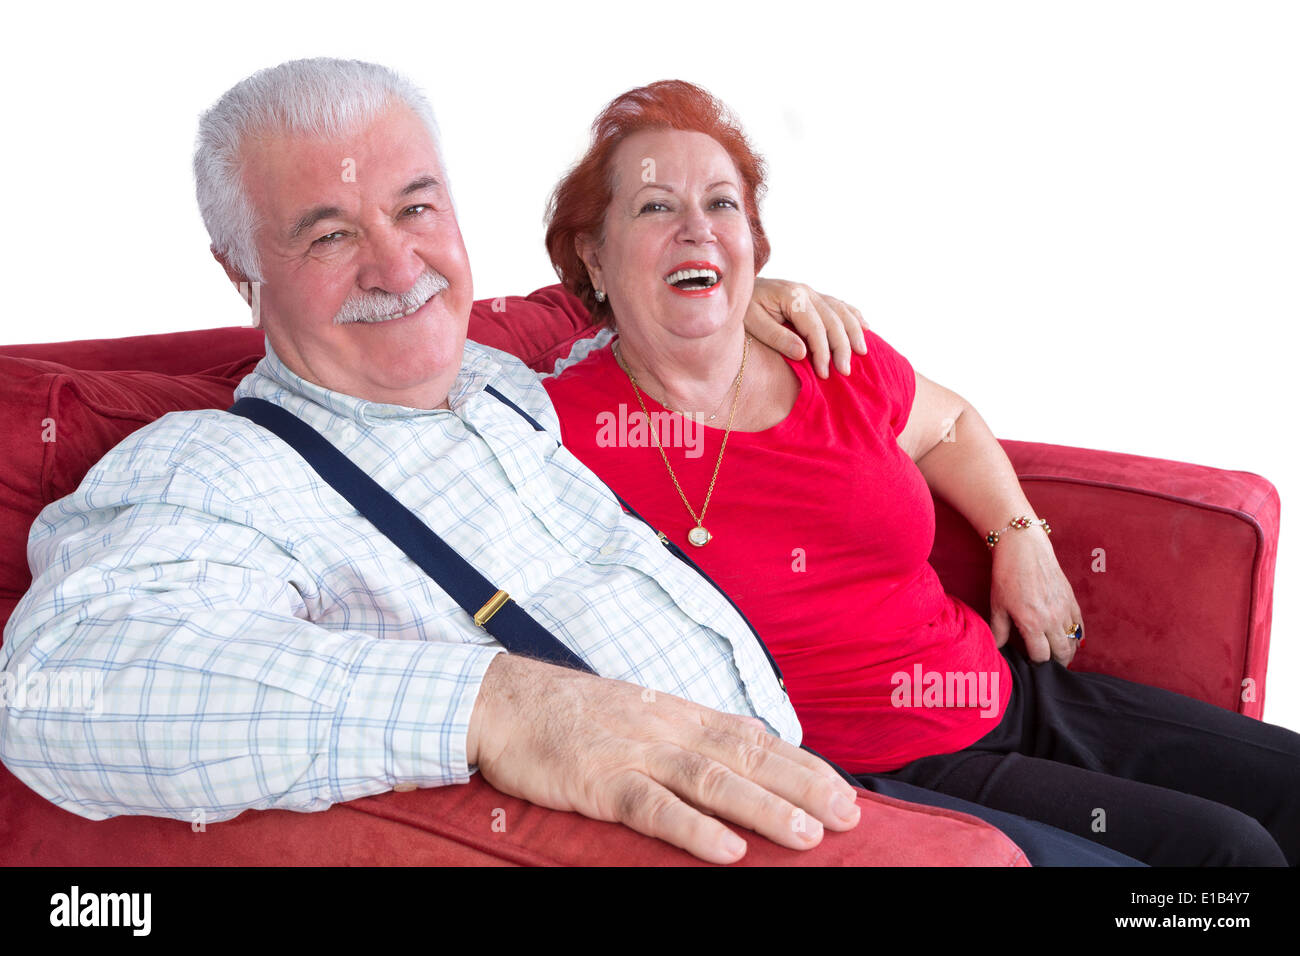 Joyful relaxed elderly couple sitting arm in arm on a red sofa laughing at the camera over white Stock Photo